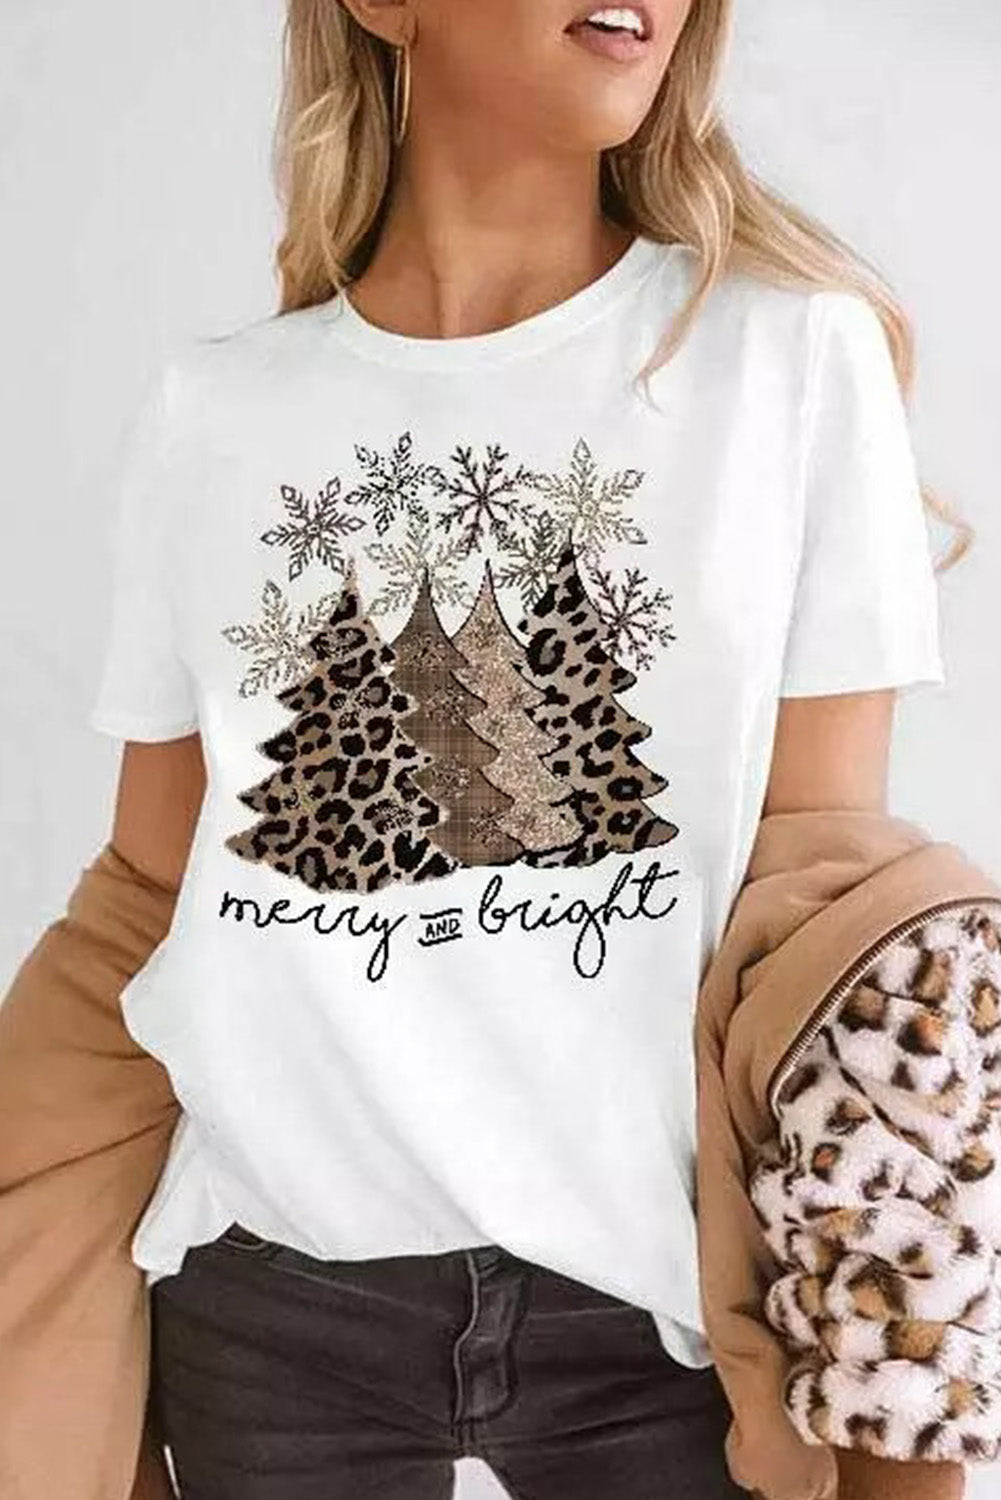 LC25219027-1-S, LC25219027-1-M, LC25219027-1-L, LC25219027-1-XL, LC25219027-1-2XL, White Leopard Christmas Tree Graphic Print Womens Xmas Holiday Pullover Top